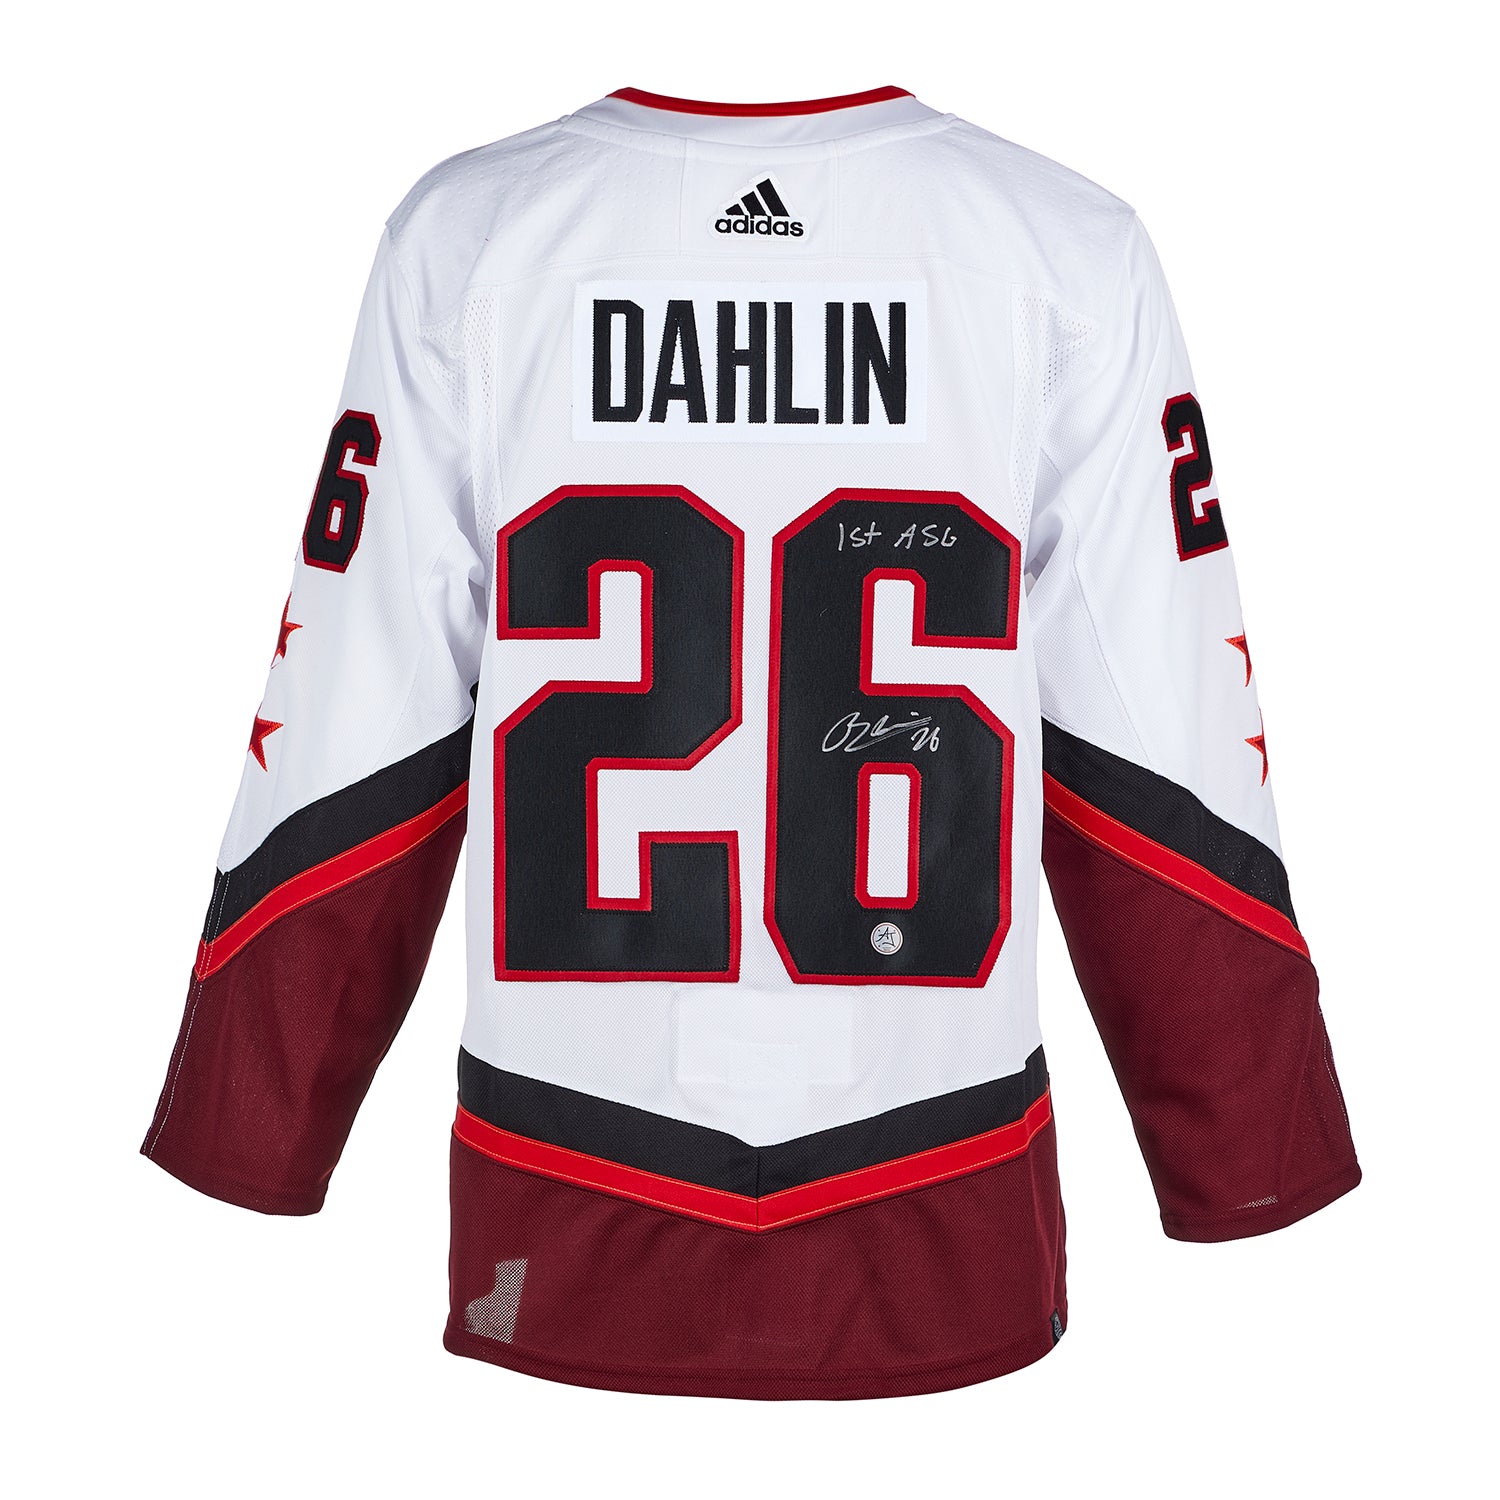 Rasmus Dahlin Buffalo Sabres Autographed White Adidas Authentic Jersey